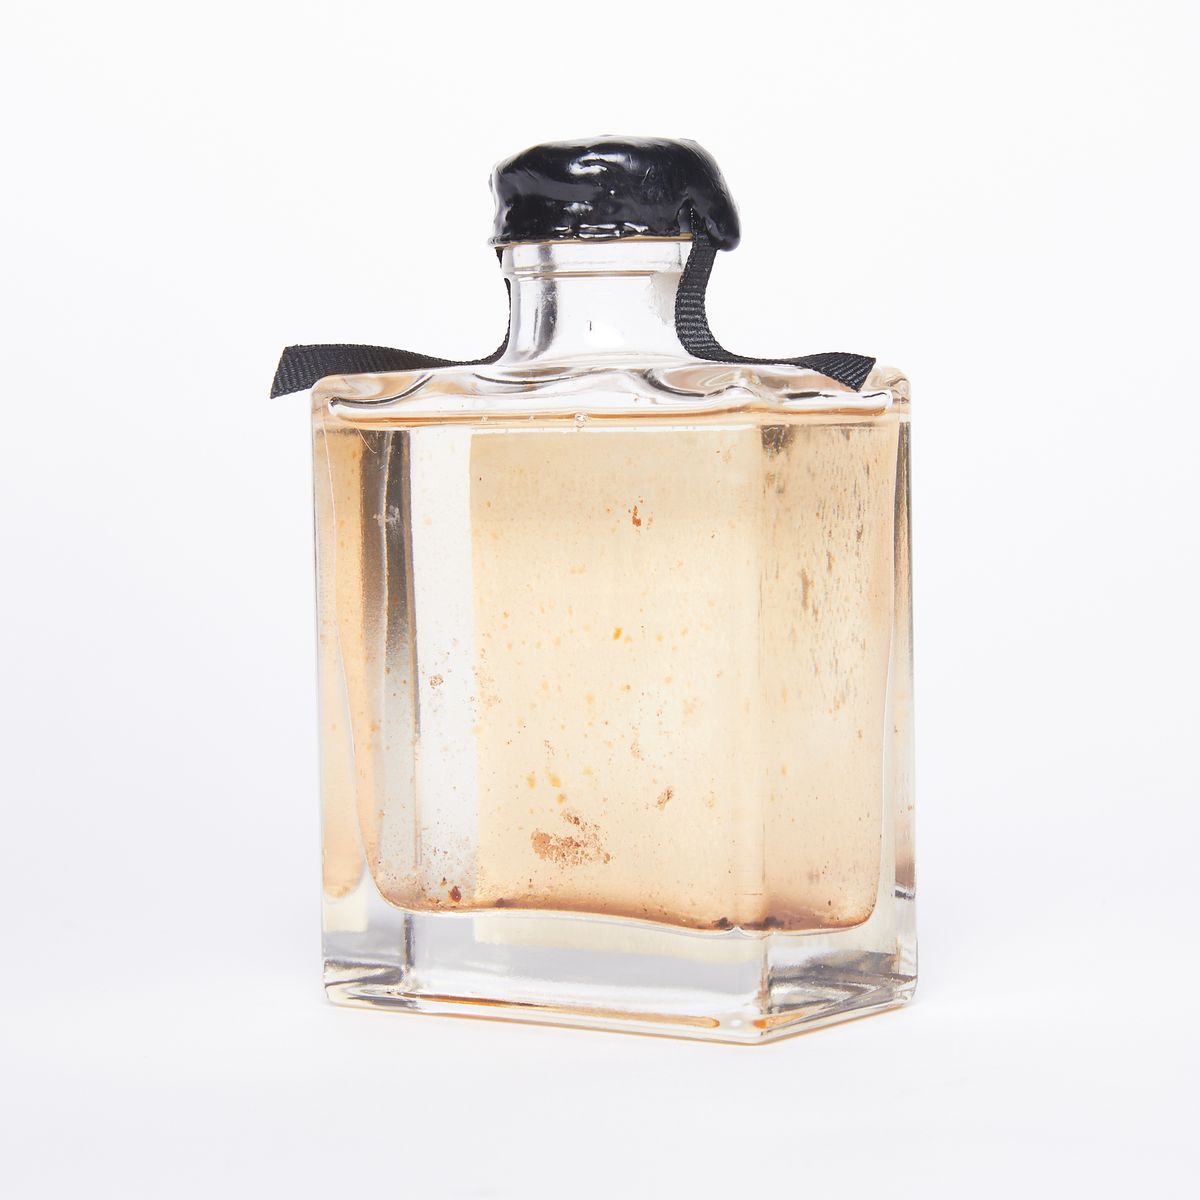 Backside of a clear bottle full of yellowish cloudy liquid with black wax covering the top